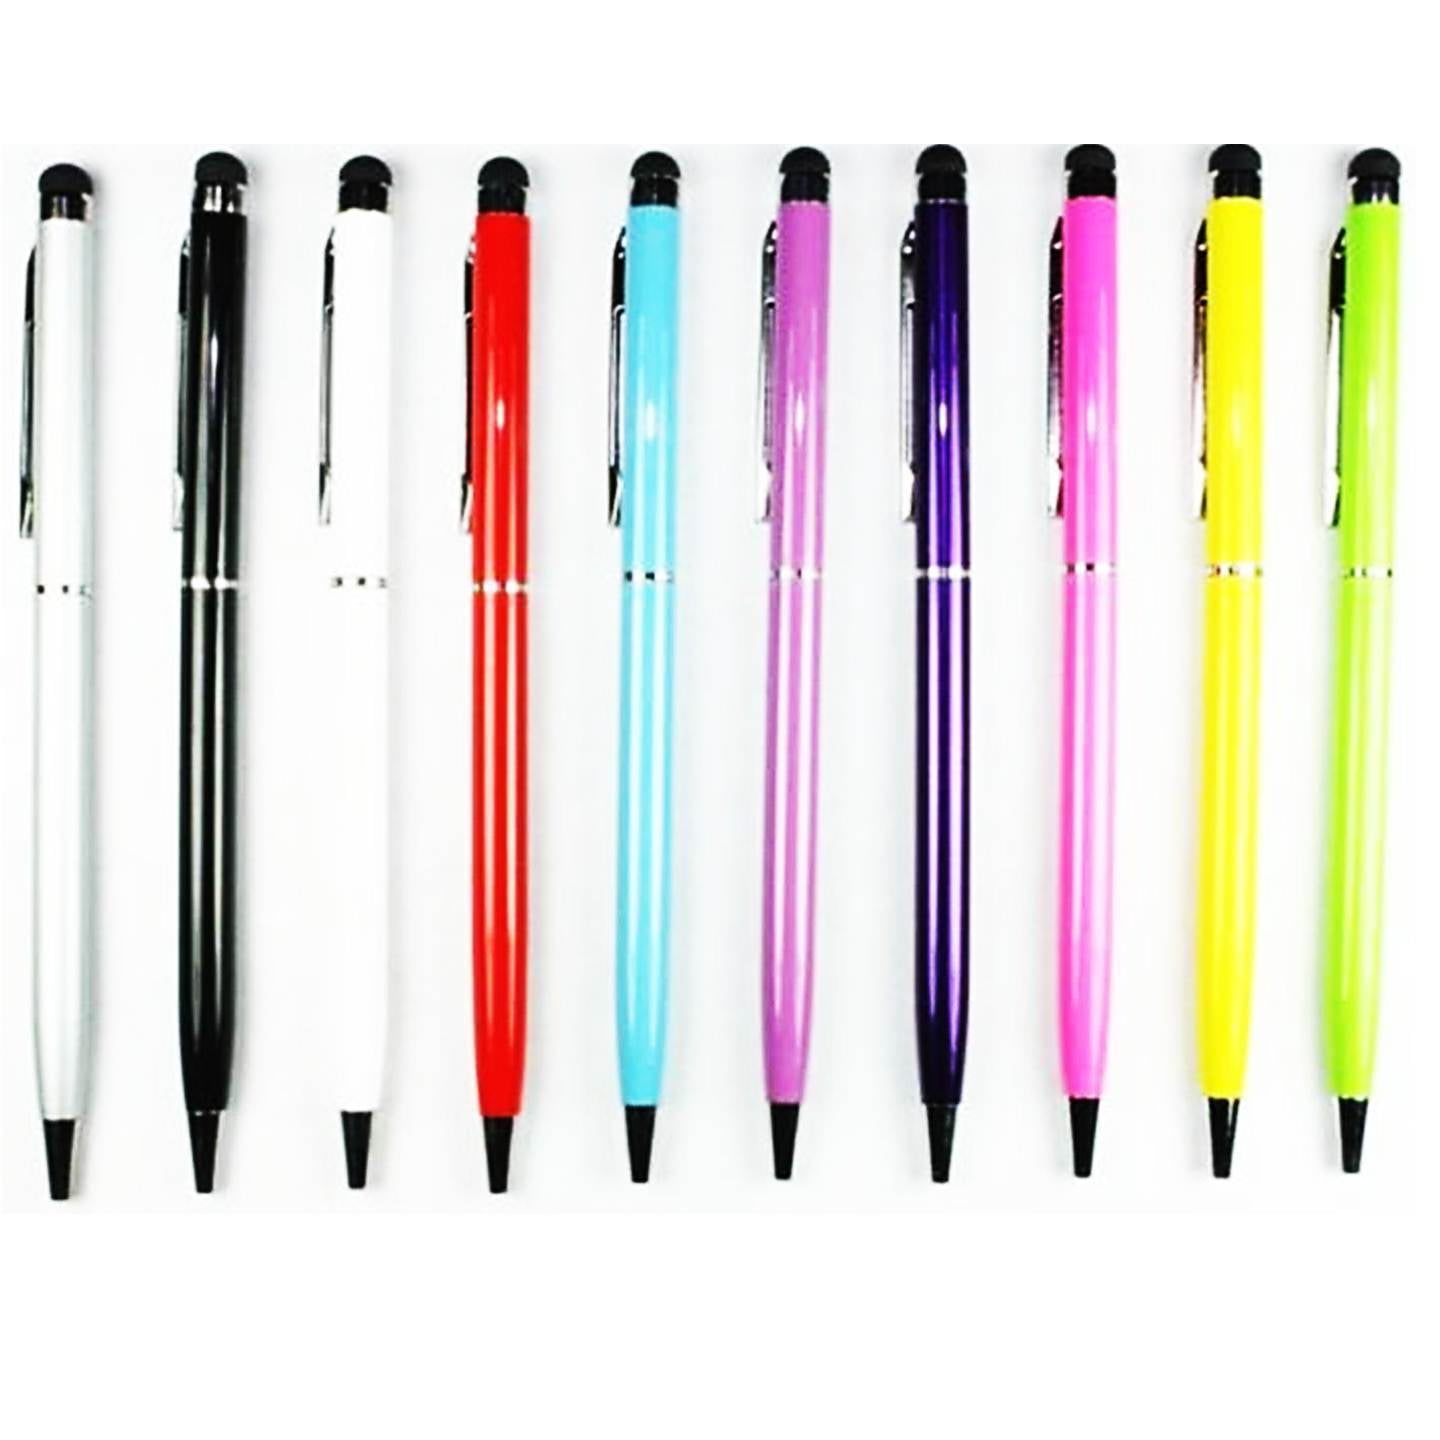 10 x Universal Replacement Stylus Pen Touch Screen For Phone Tablet iPad iPod 